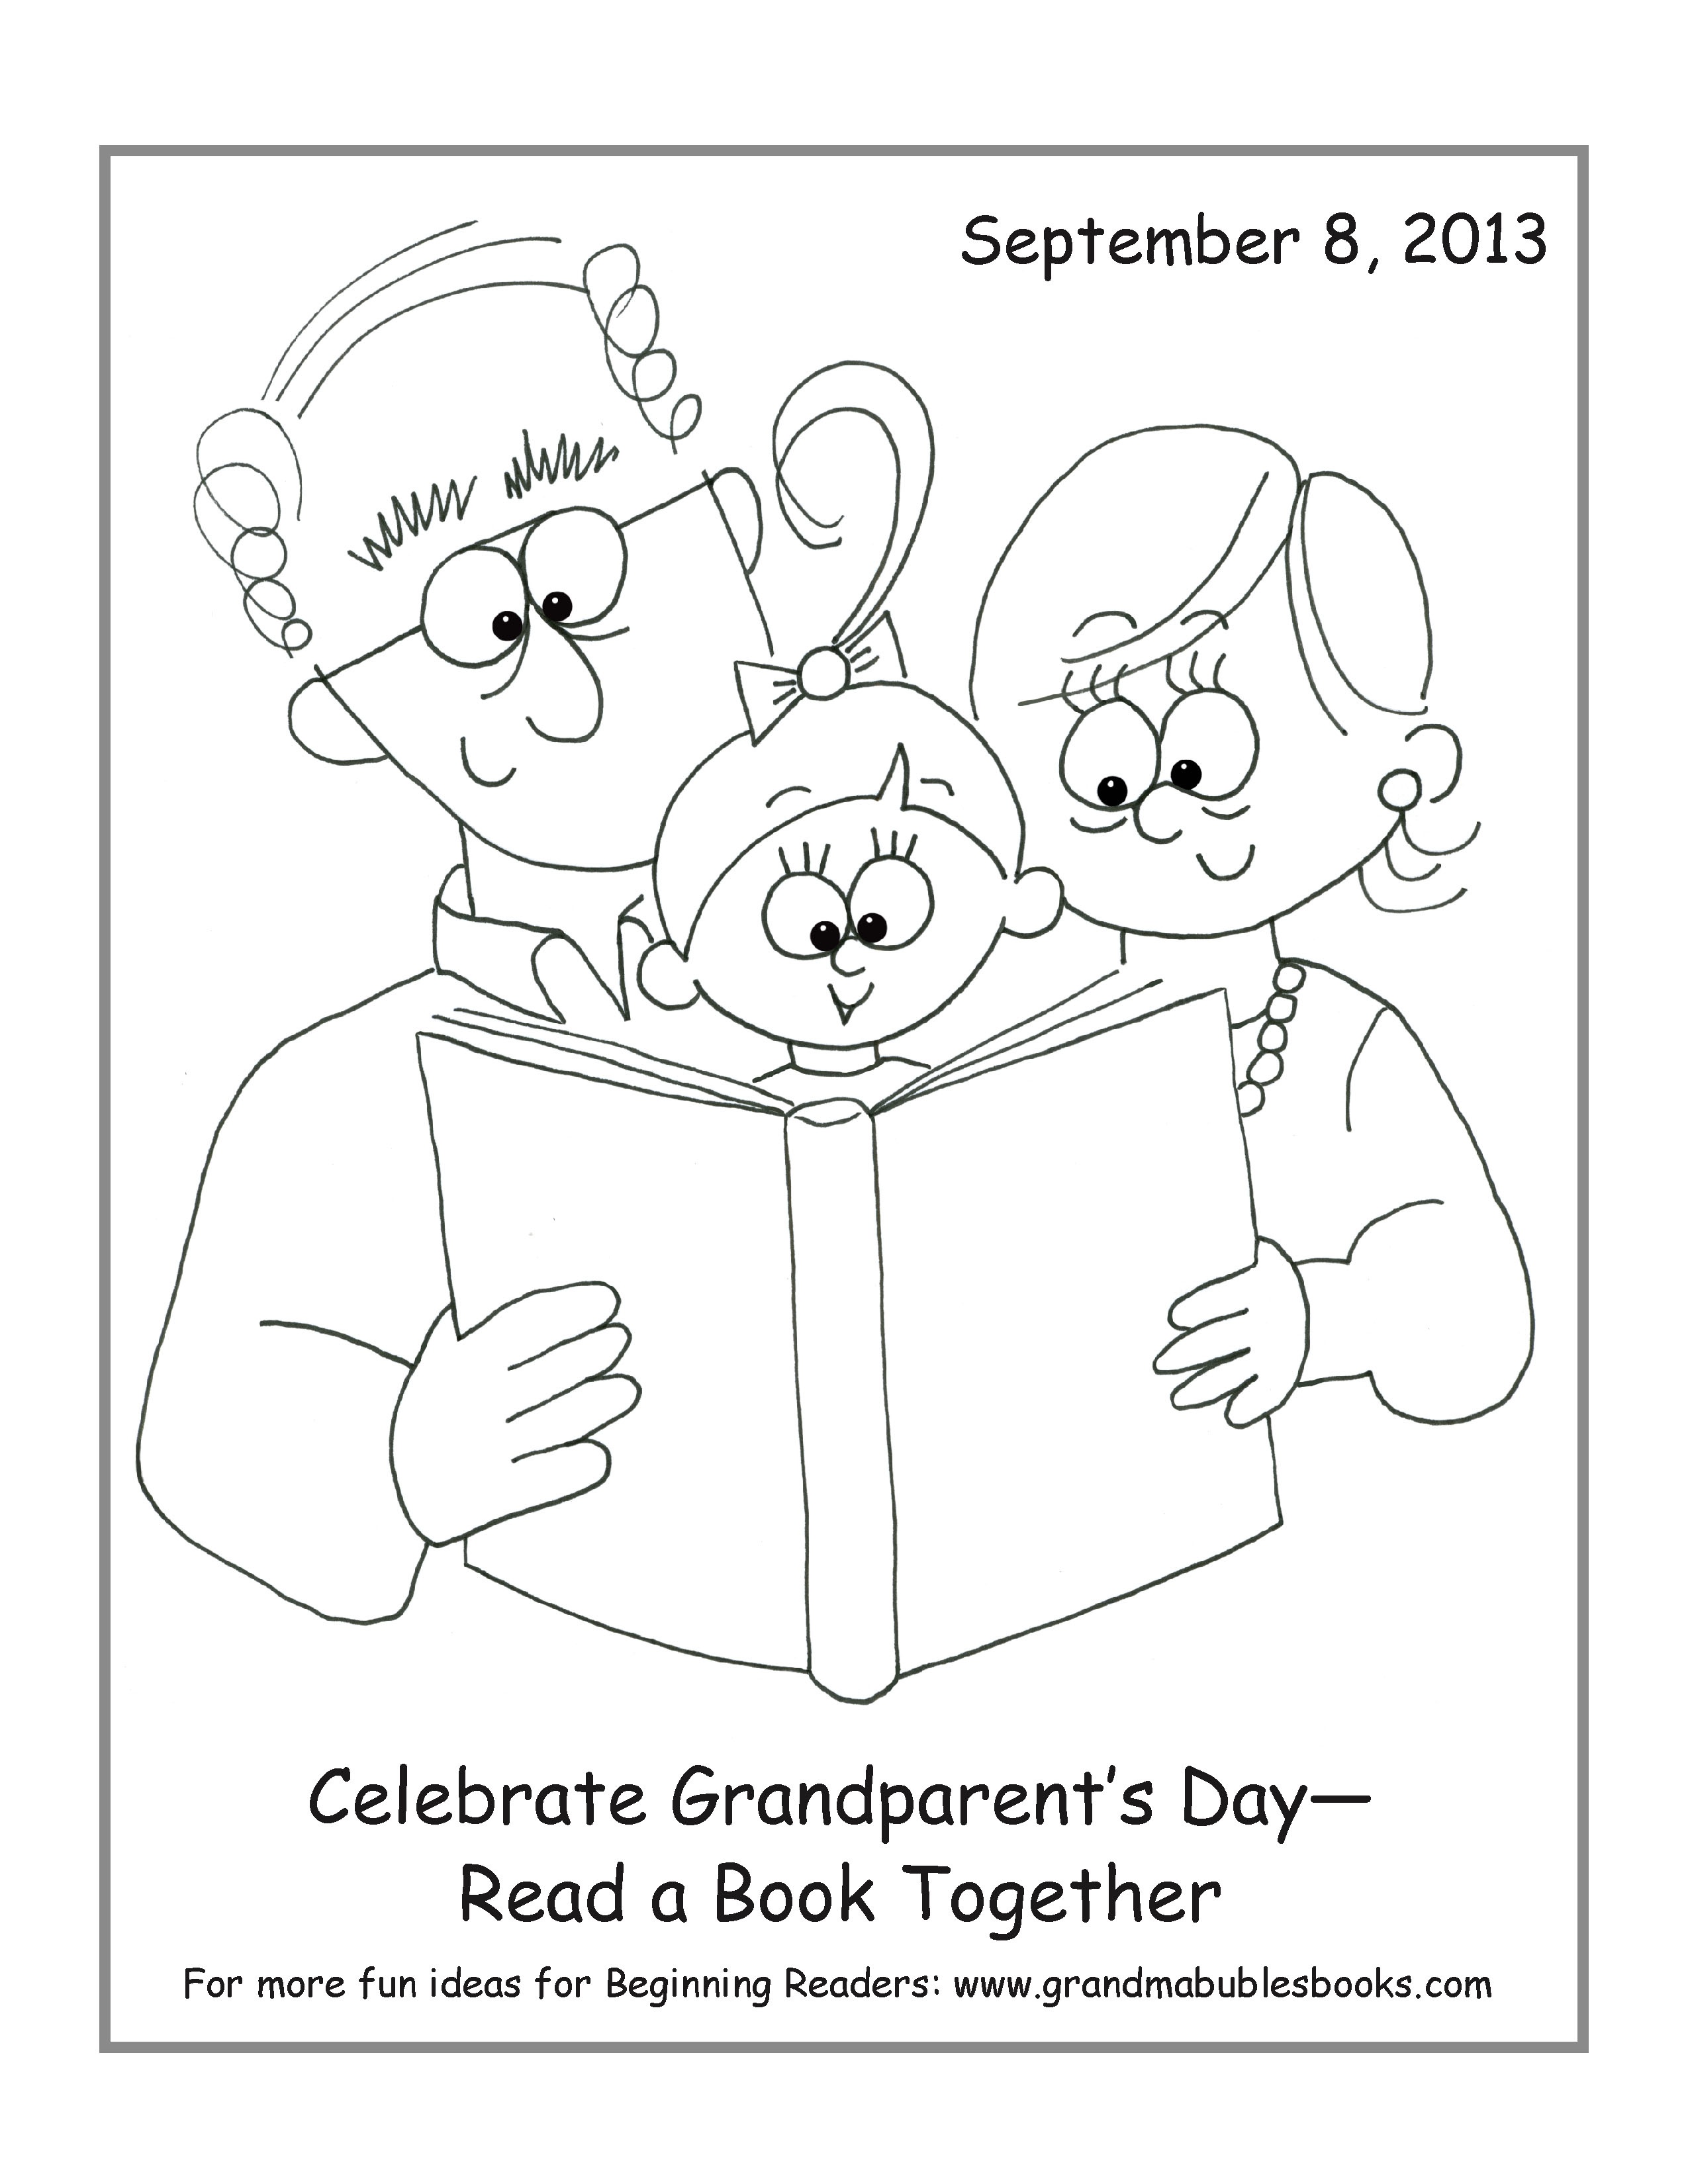 grandparents-day-printable-gifts-and-fun-activities-heart-coloring